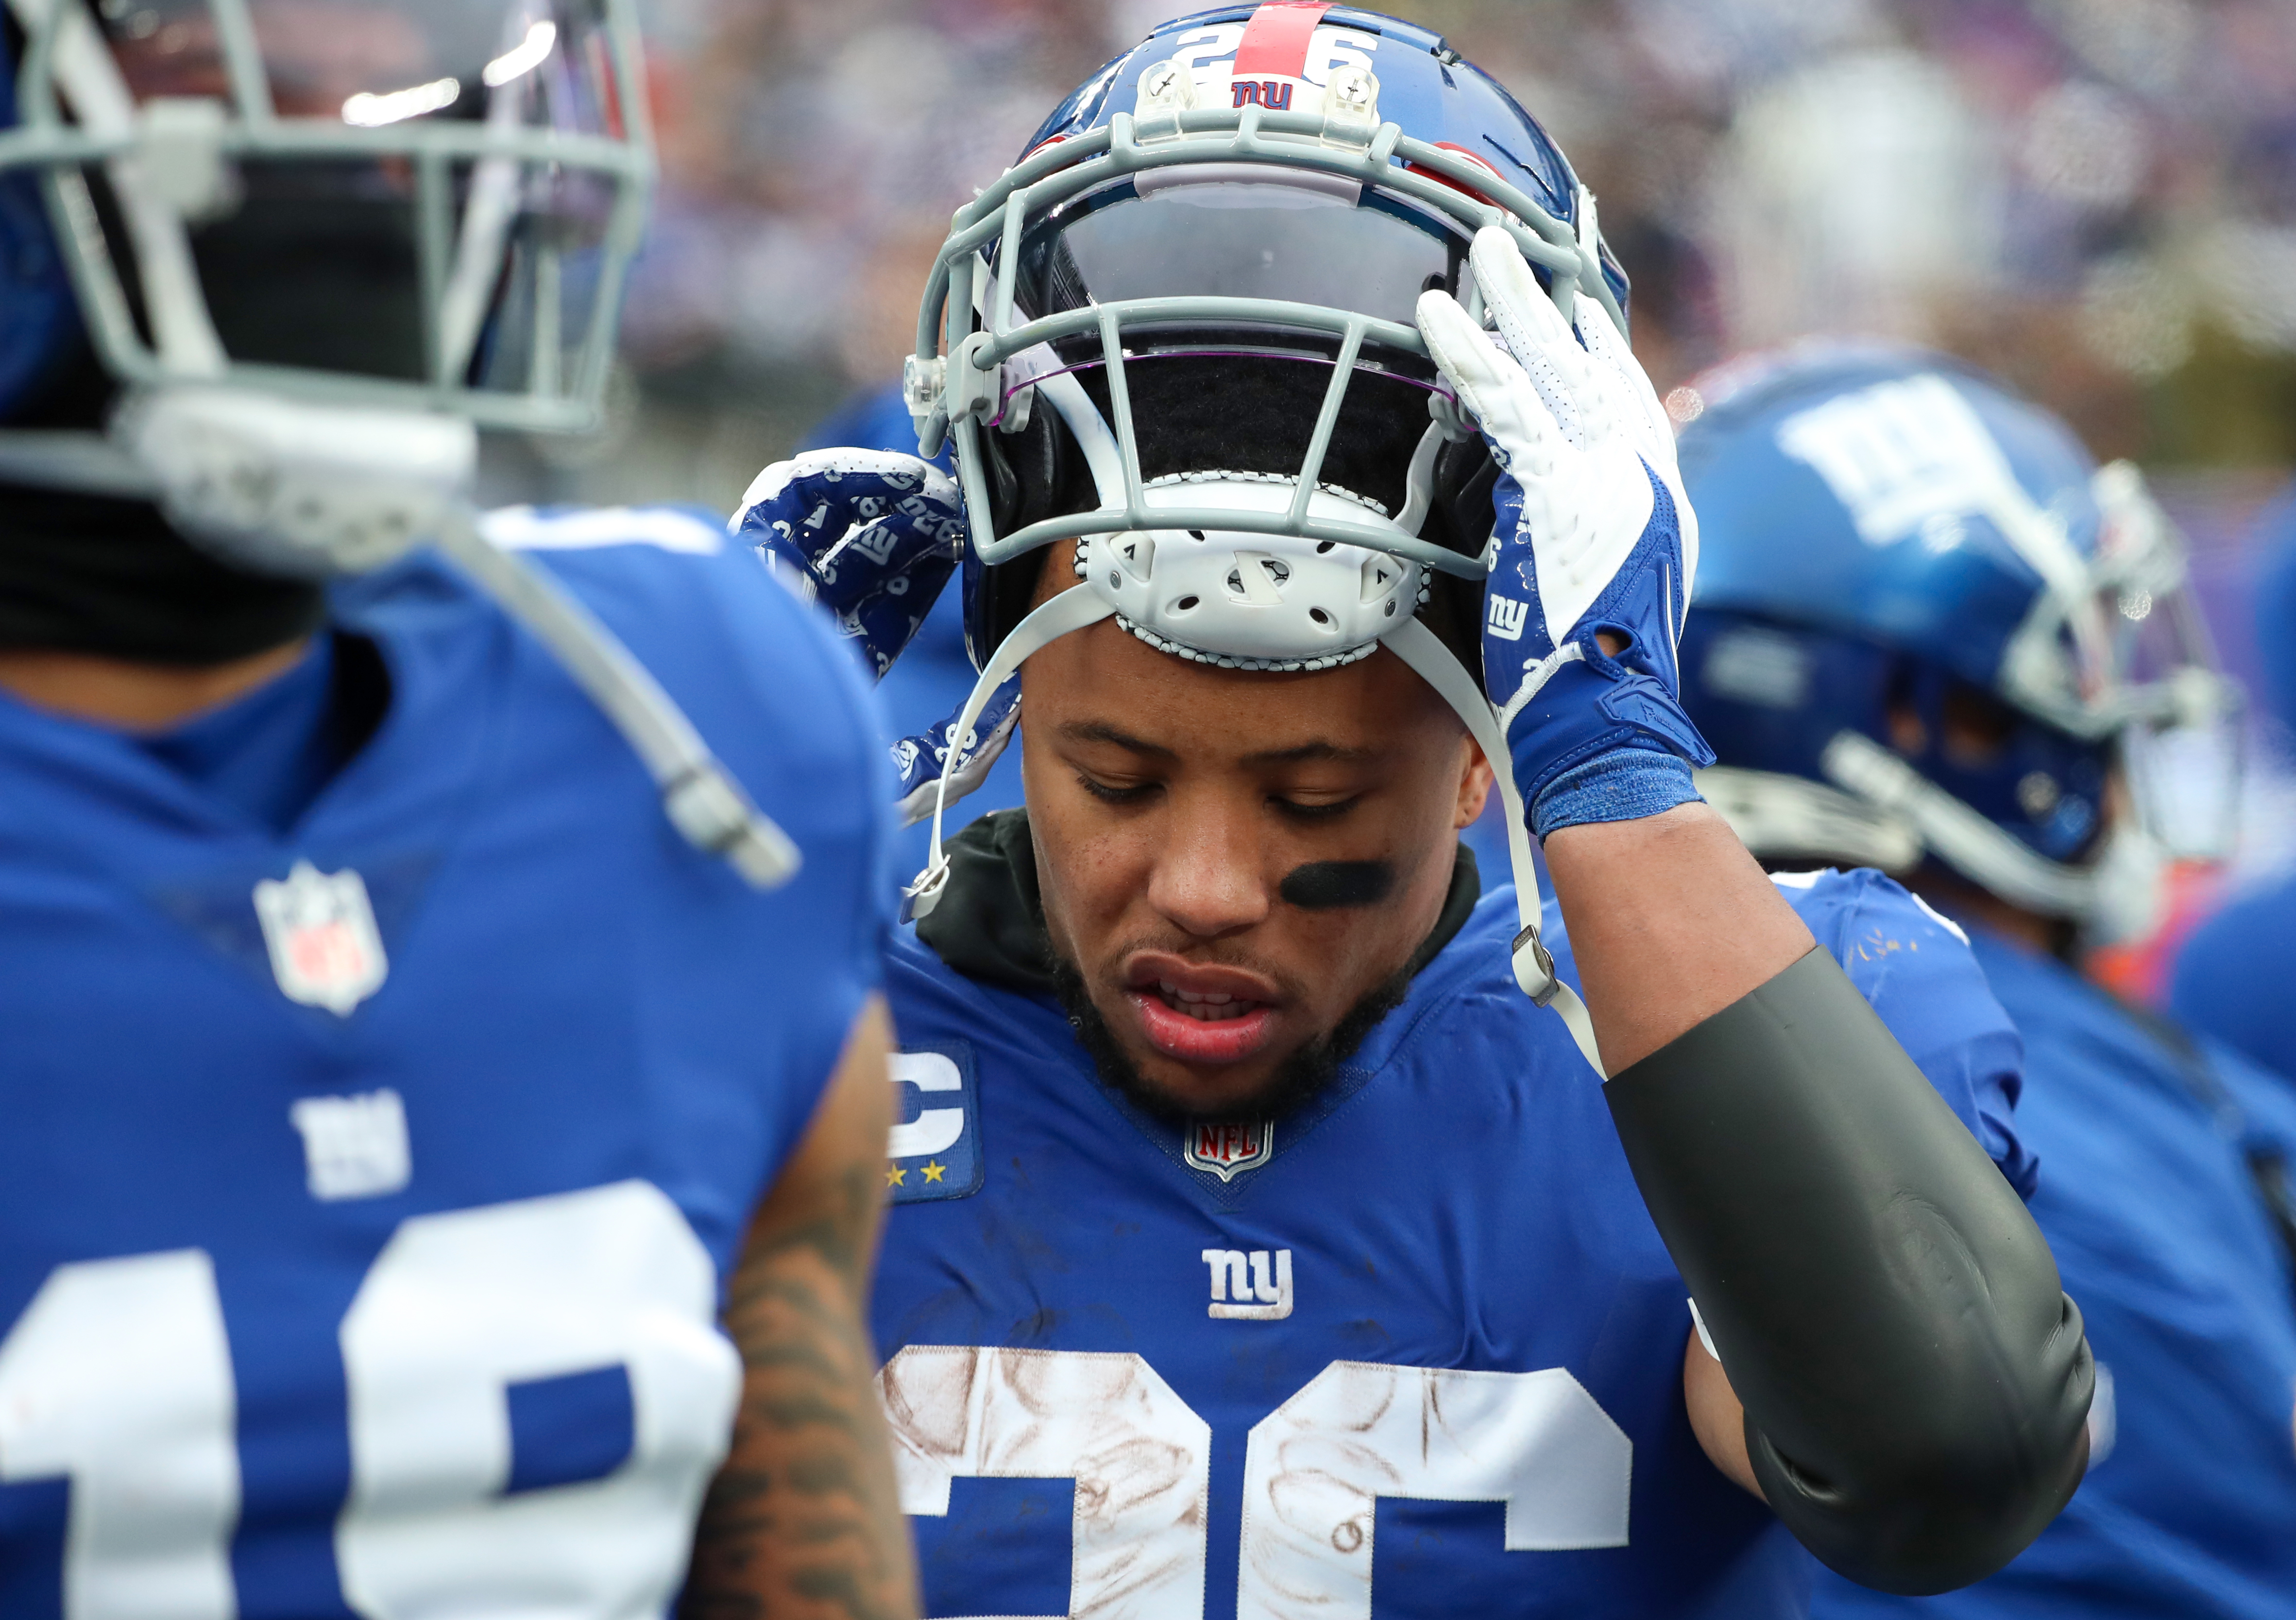 New York Giants running back Saquon Barkley (26) gained 30 yards on 11 carries in a losing effort against the Washington Football Team on Sunday, Jan. 9, 2022 in East Rutherford, N.J. Washington won, 22-7.